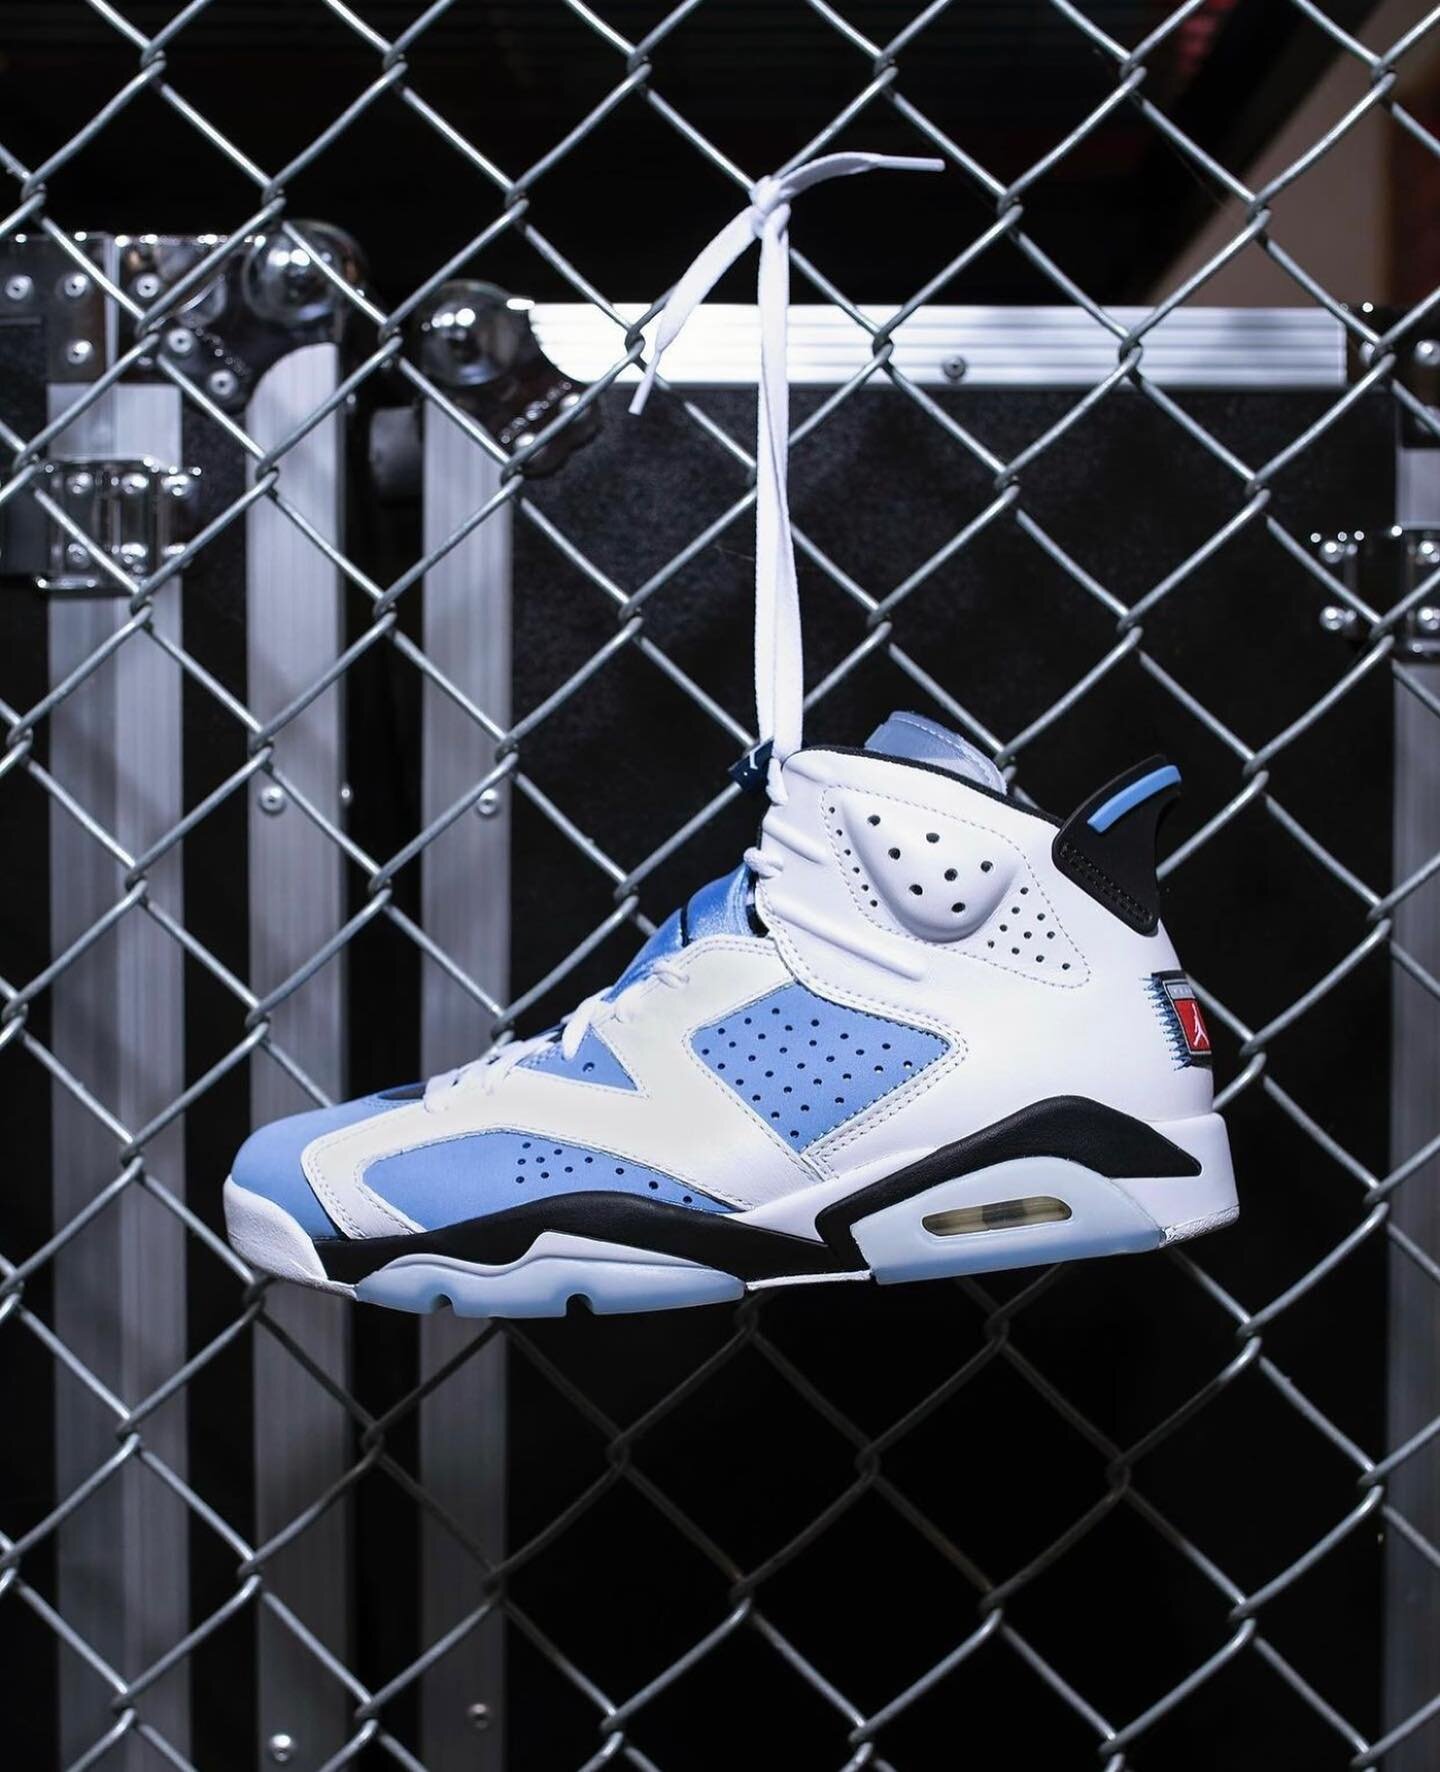 Before the 6 rings, MJ was determined to make a name for himself at the collegiate level. @jumpman23 is taking it back to where it all started with &ldquo;UNC&rdquo; Jordan 6 releasing in University Blue on March 5th.
📸: @extrabutter